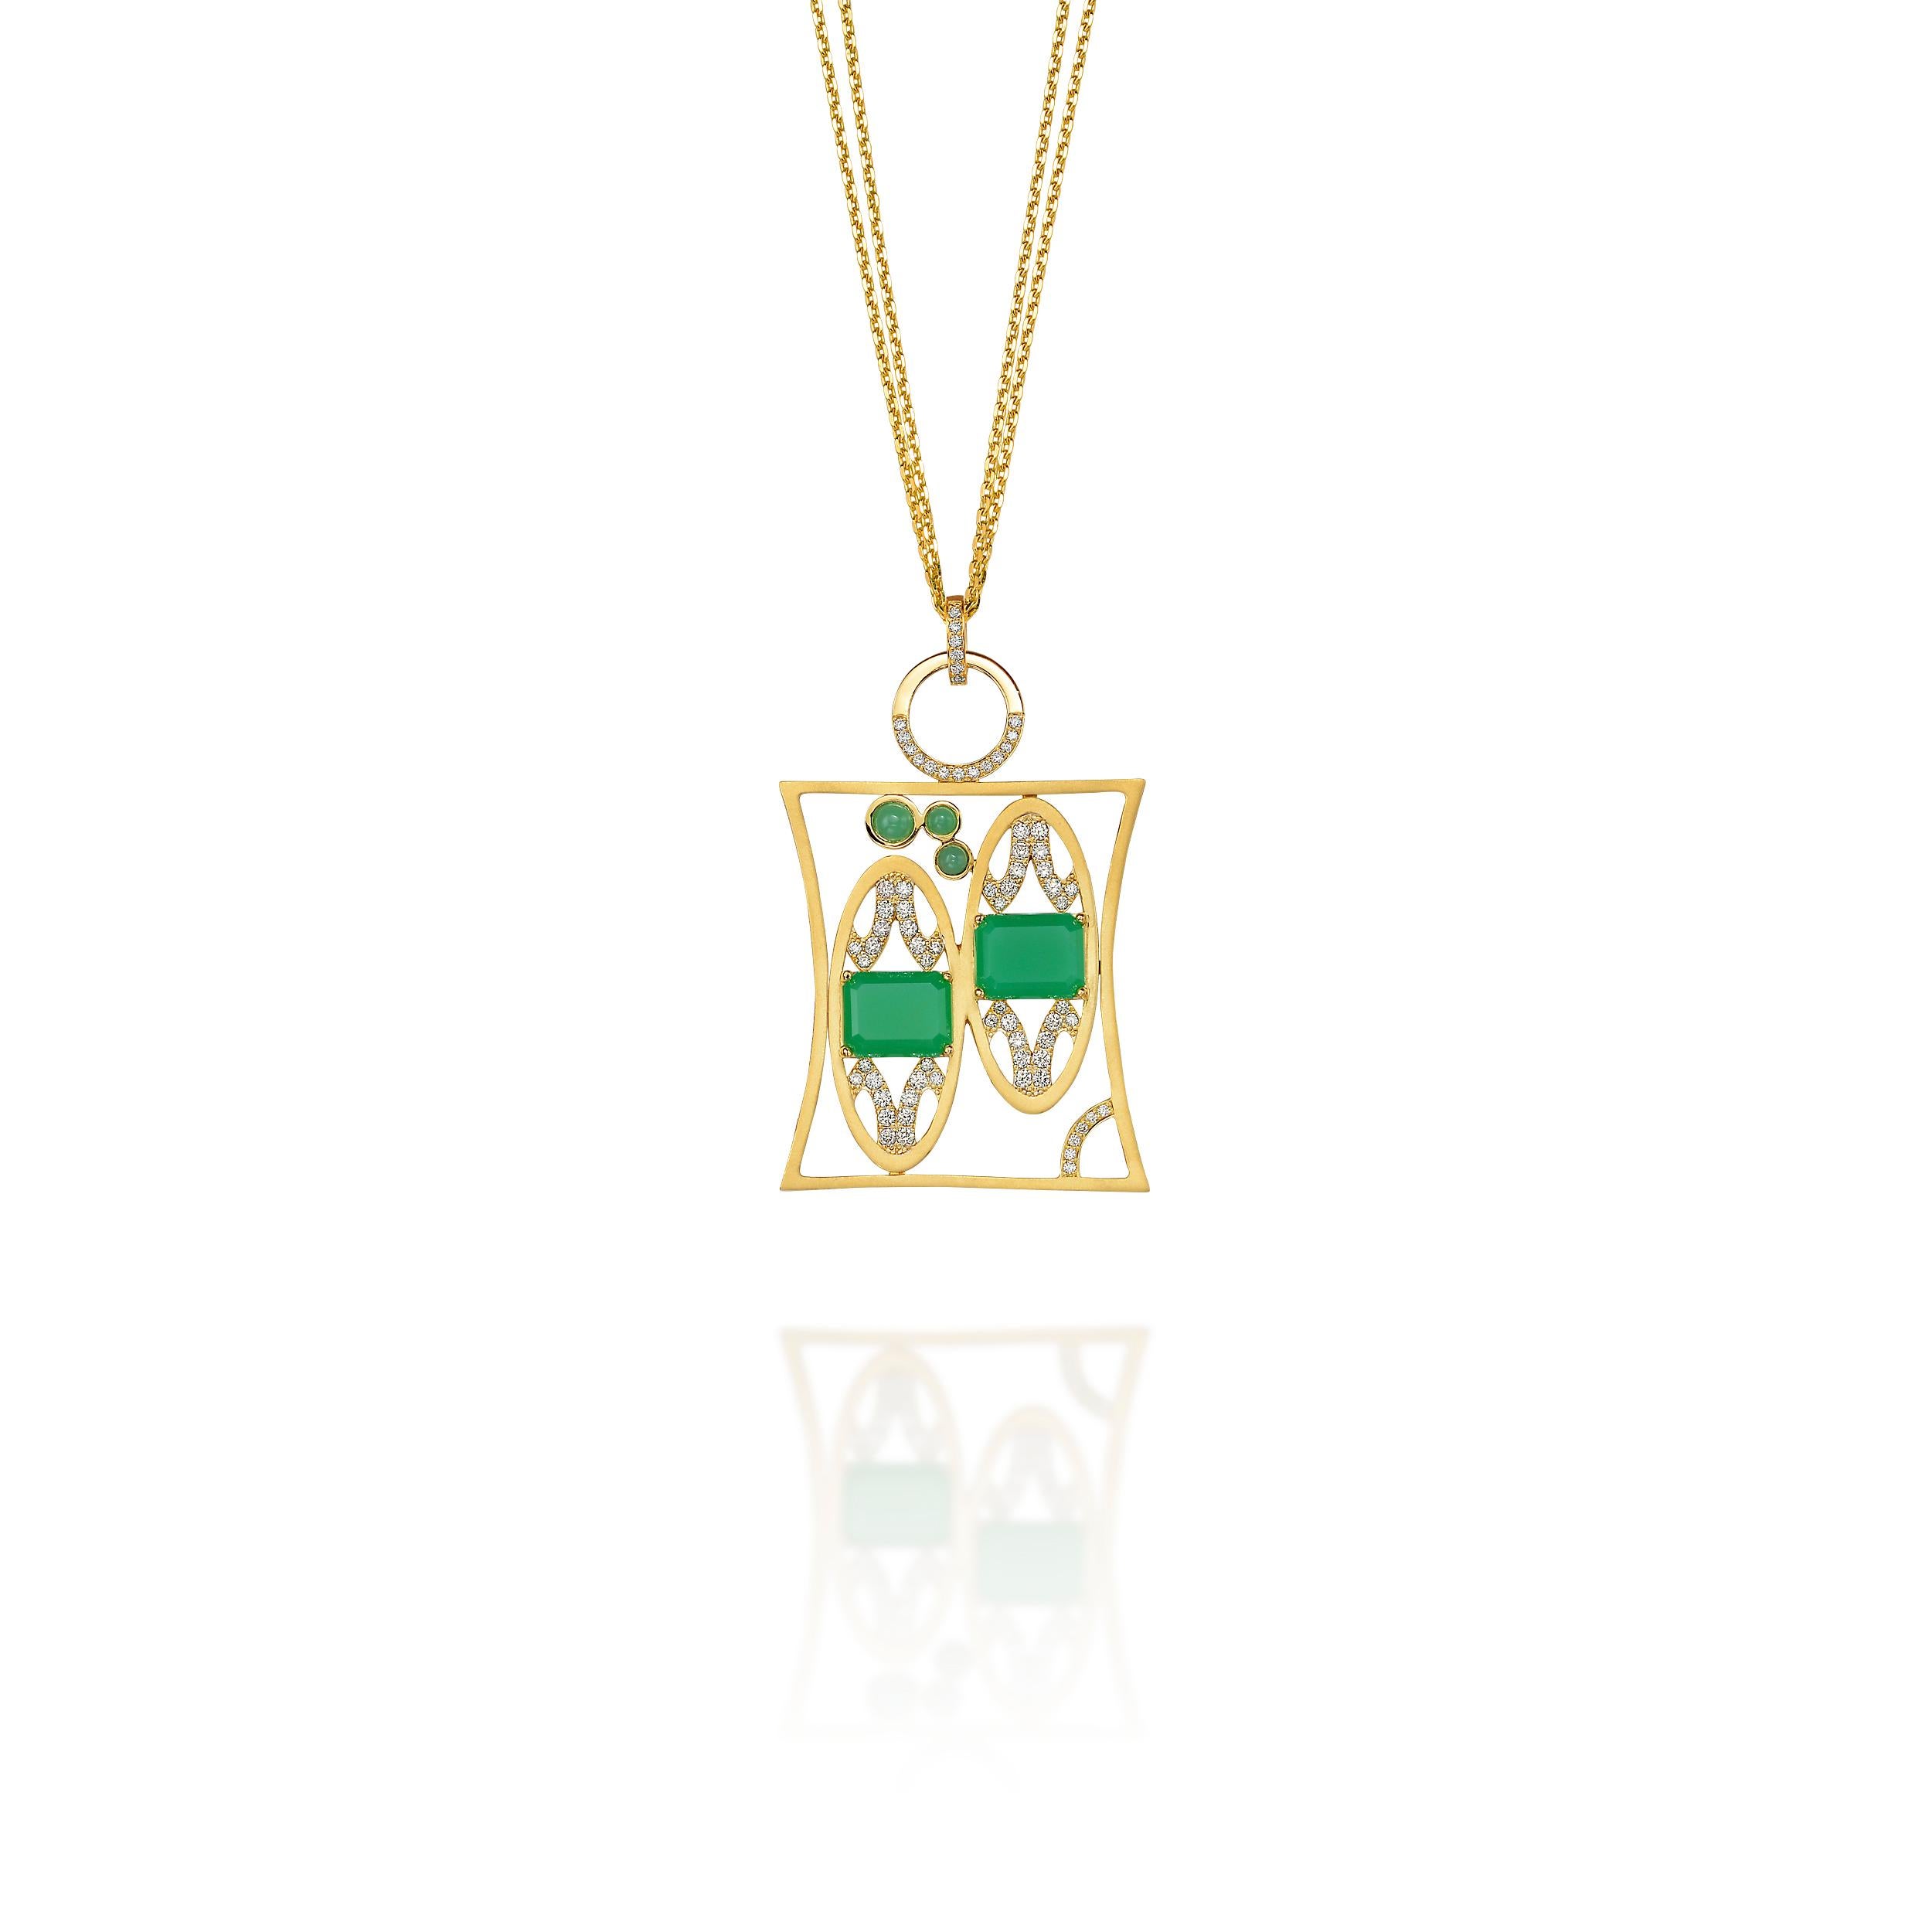 Gemini Pendant - endlessly charming, in free spirit and youthful exuberance with a constant appetite to expand the mental hori-zon. Chrysoprase stones exhilarate your optimism.

Jazychic Zodiac Pendant 18k Gold with 1.0 ct Diamonds and